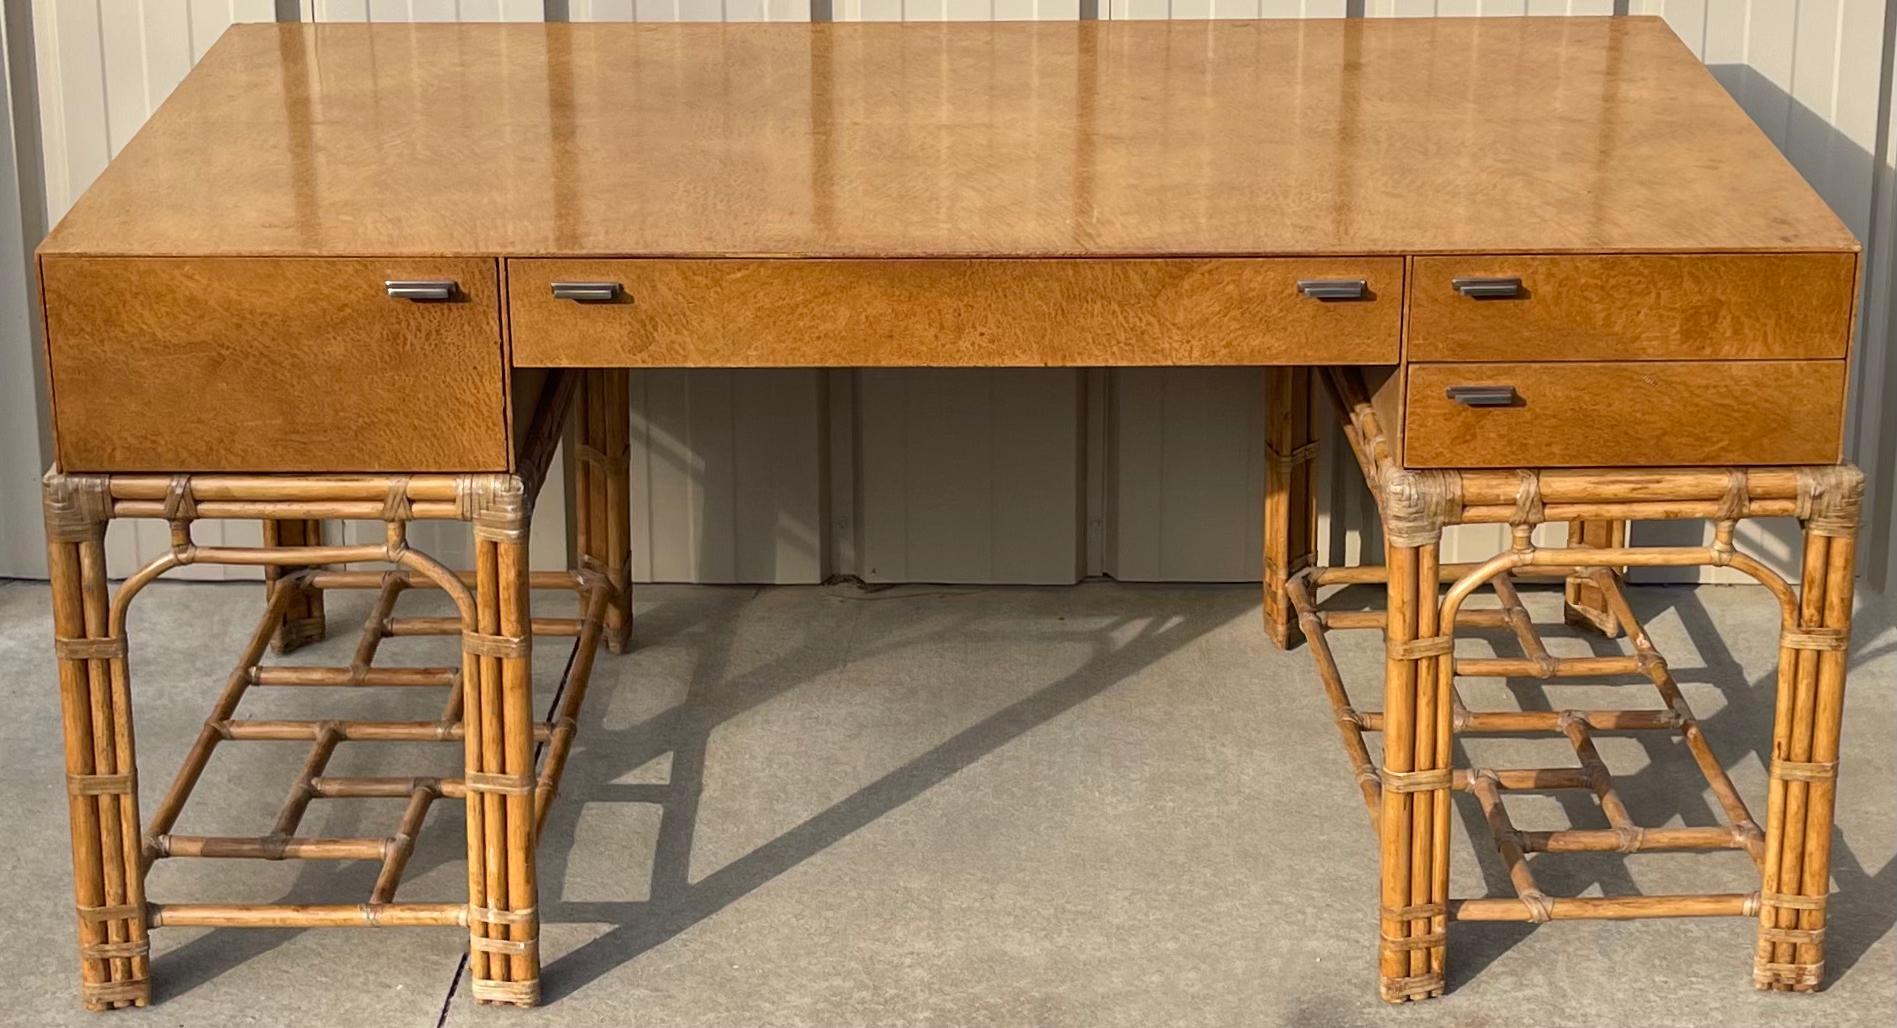 This is an excellent desk. It is a birdseye maple piece with double pedestal rattan base manufactured by Henredon as part of their Circa East Collection. The hardware is nickel, and it does breakdown into three pieces for ease of transportation.